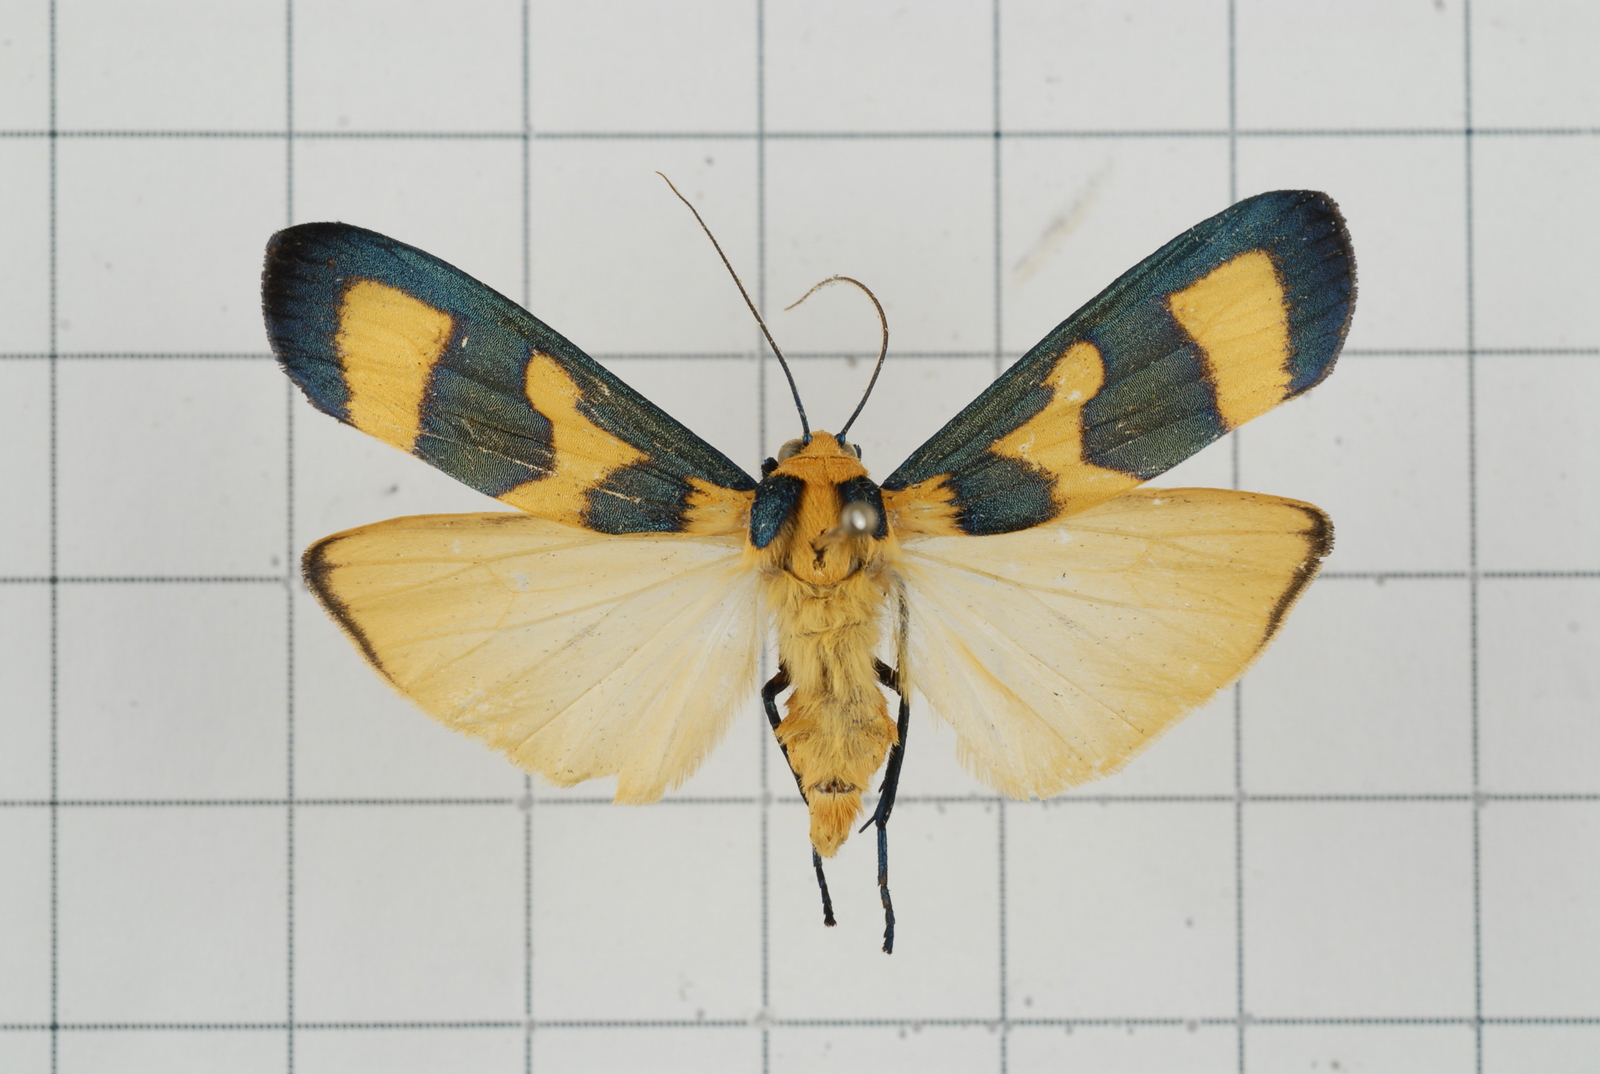 the moth is orange and blue with black on its wings